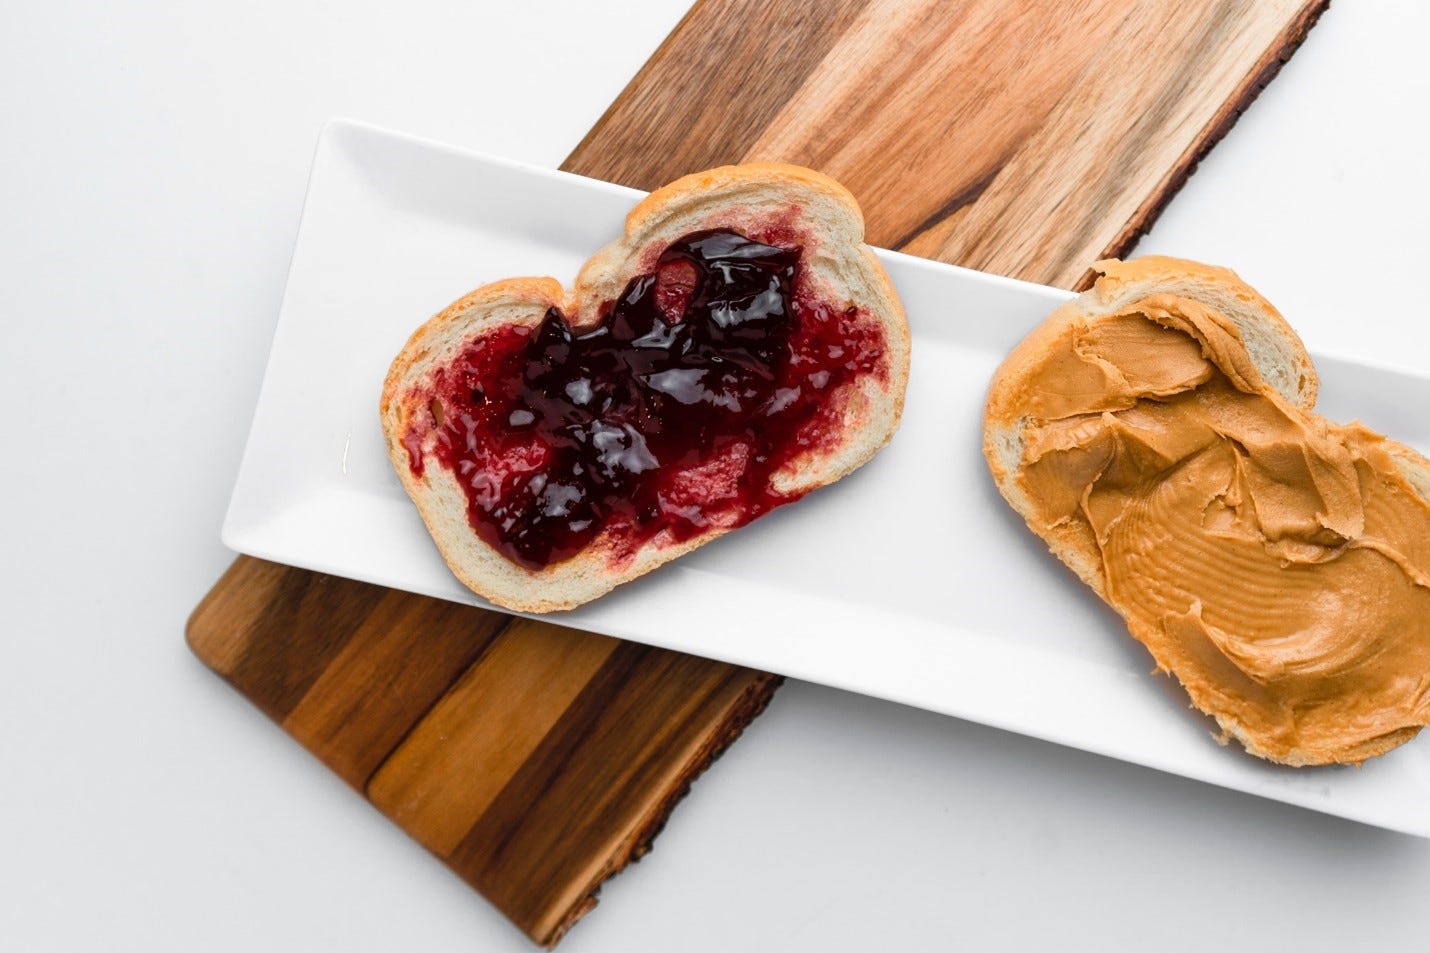 Two pieces of bread on a white plate, one with peanut butter, the other with jelly